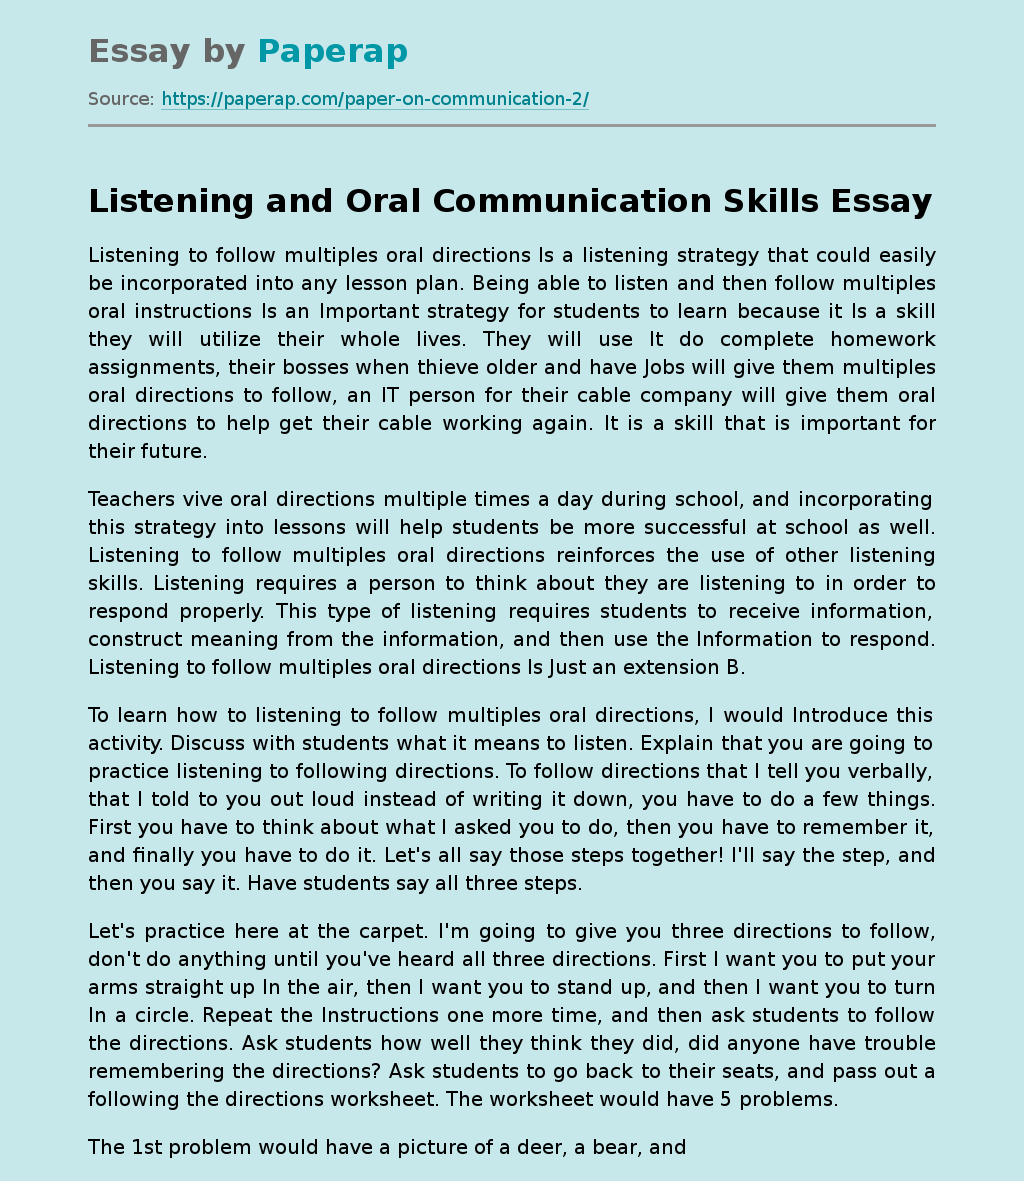 Listening and Oral Communication Skills